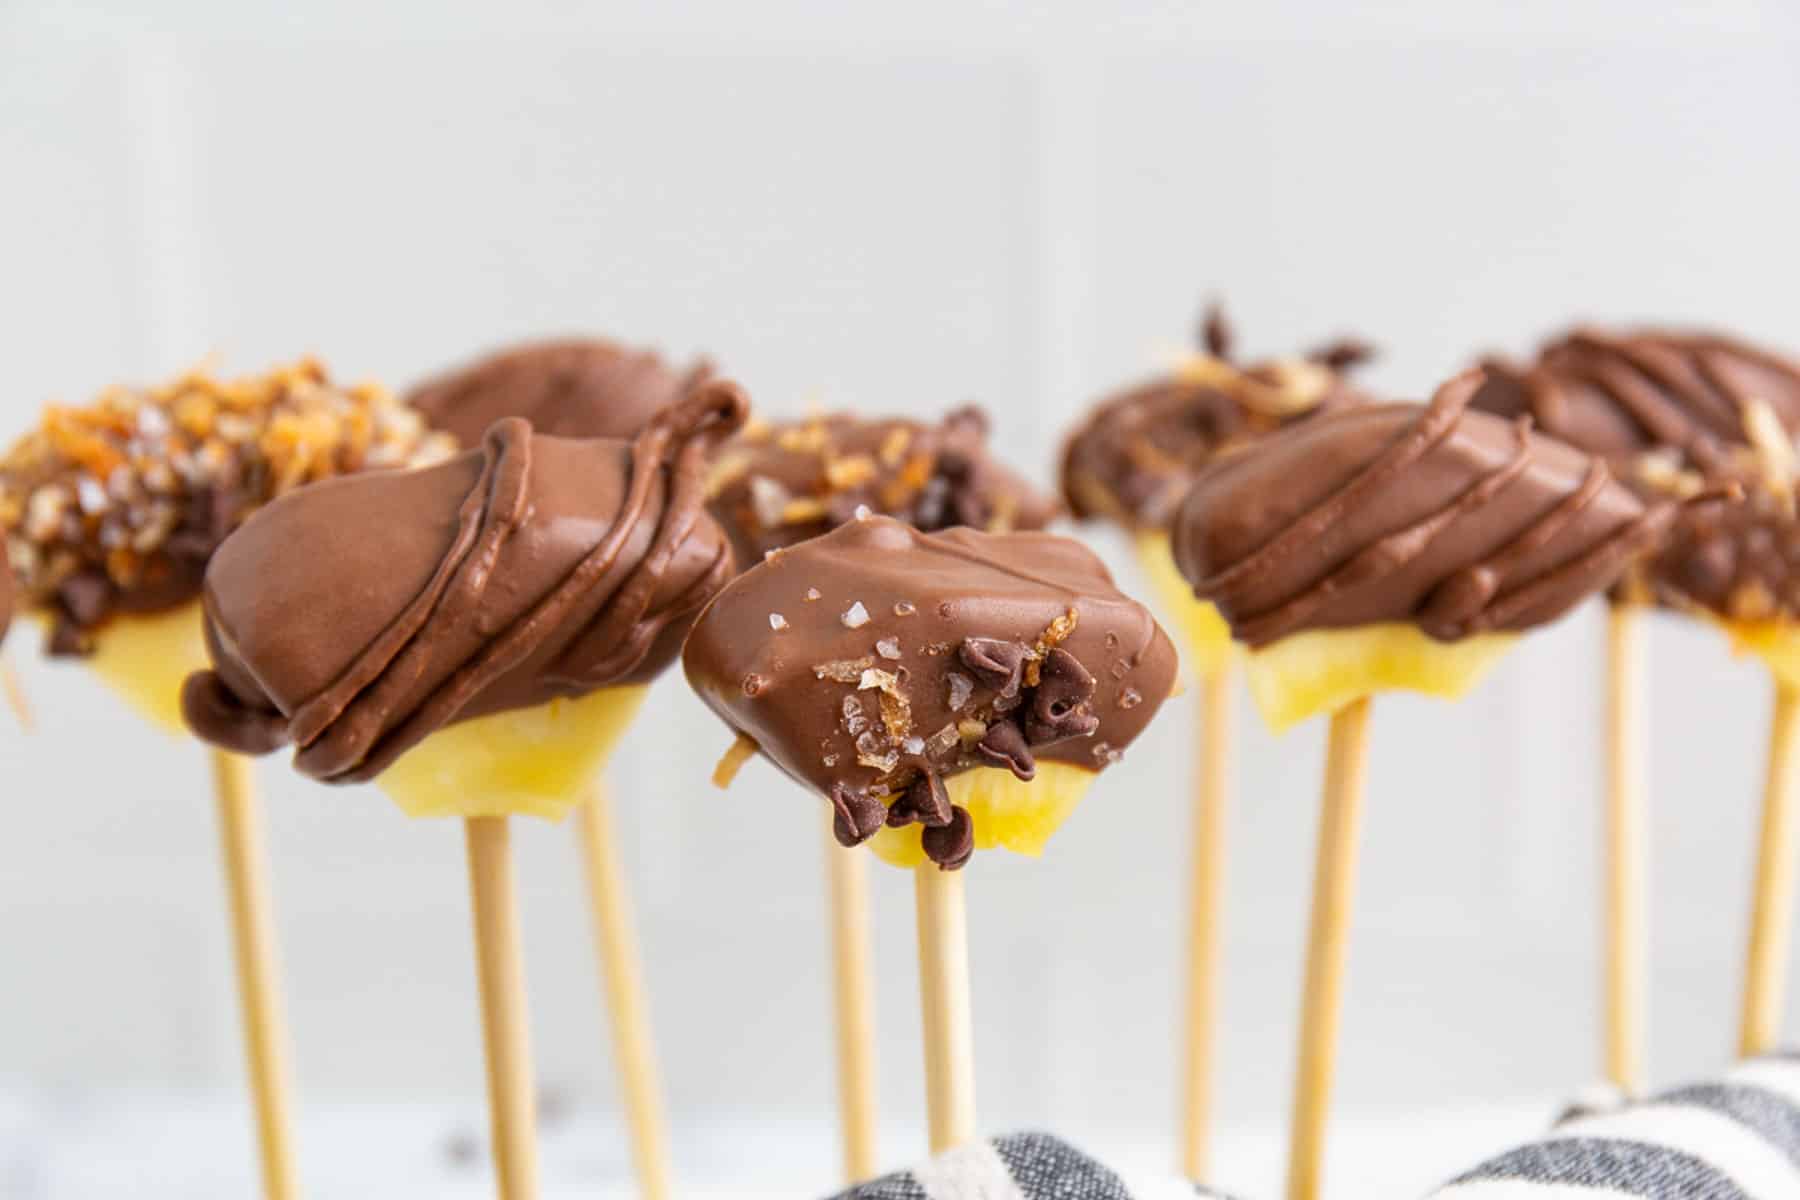 Chocolate dipped pineapple skewers with coconut standing upright.